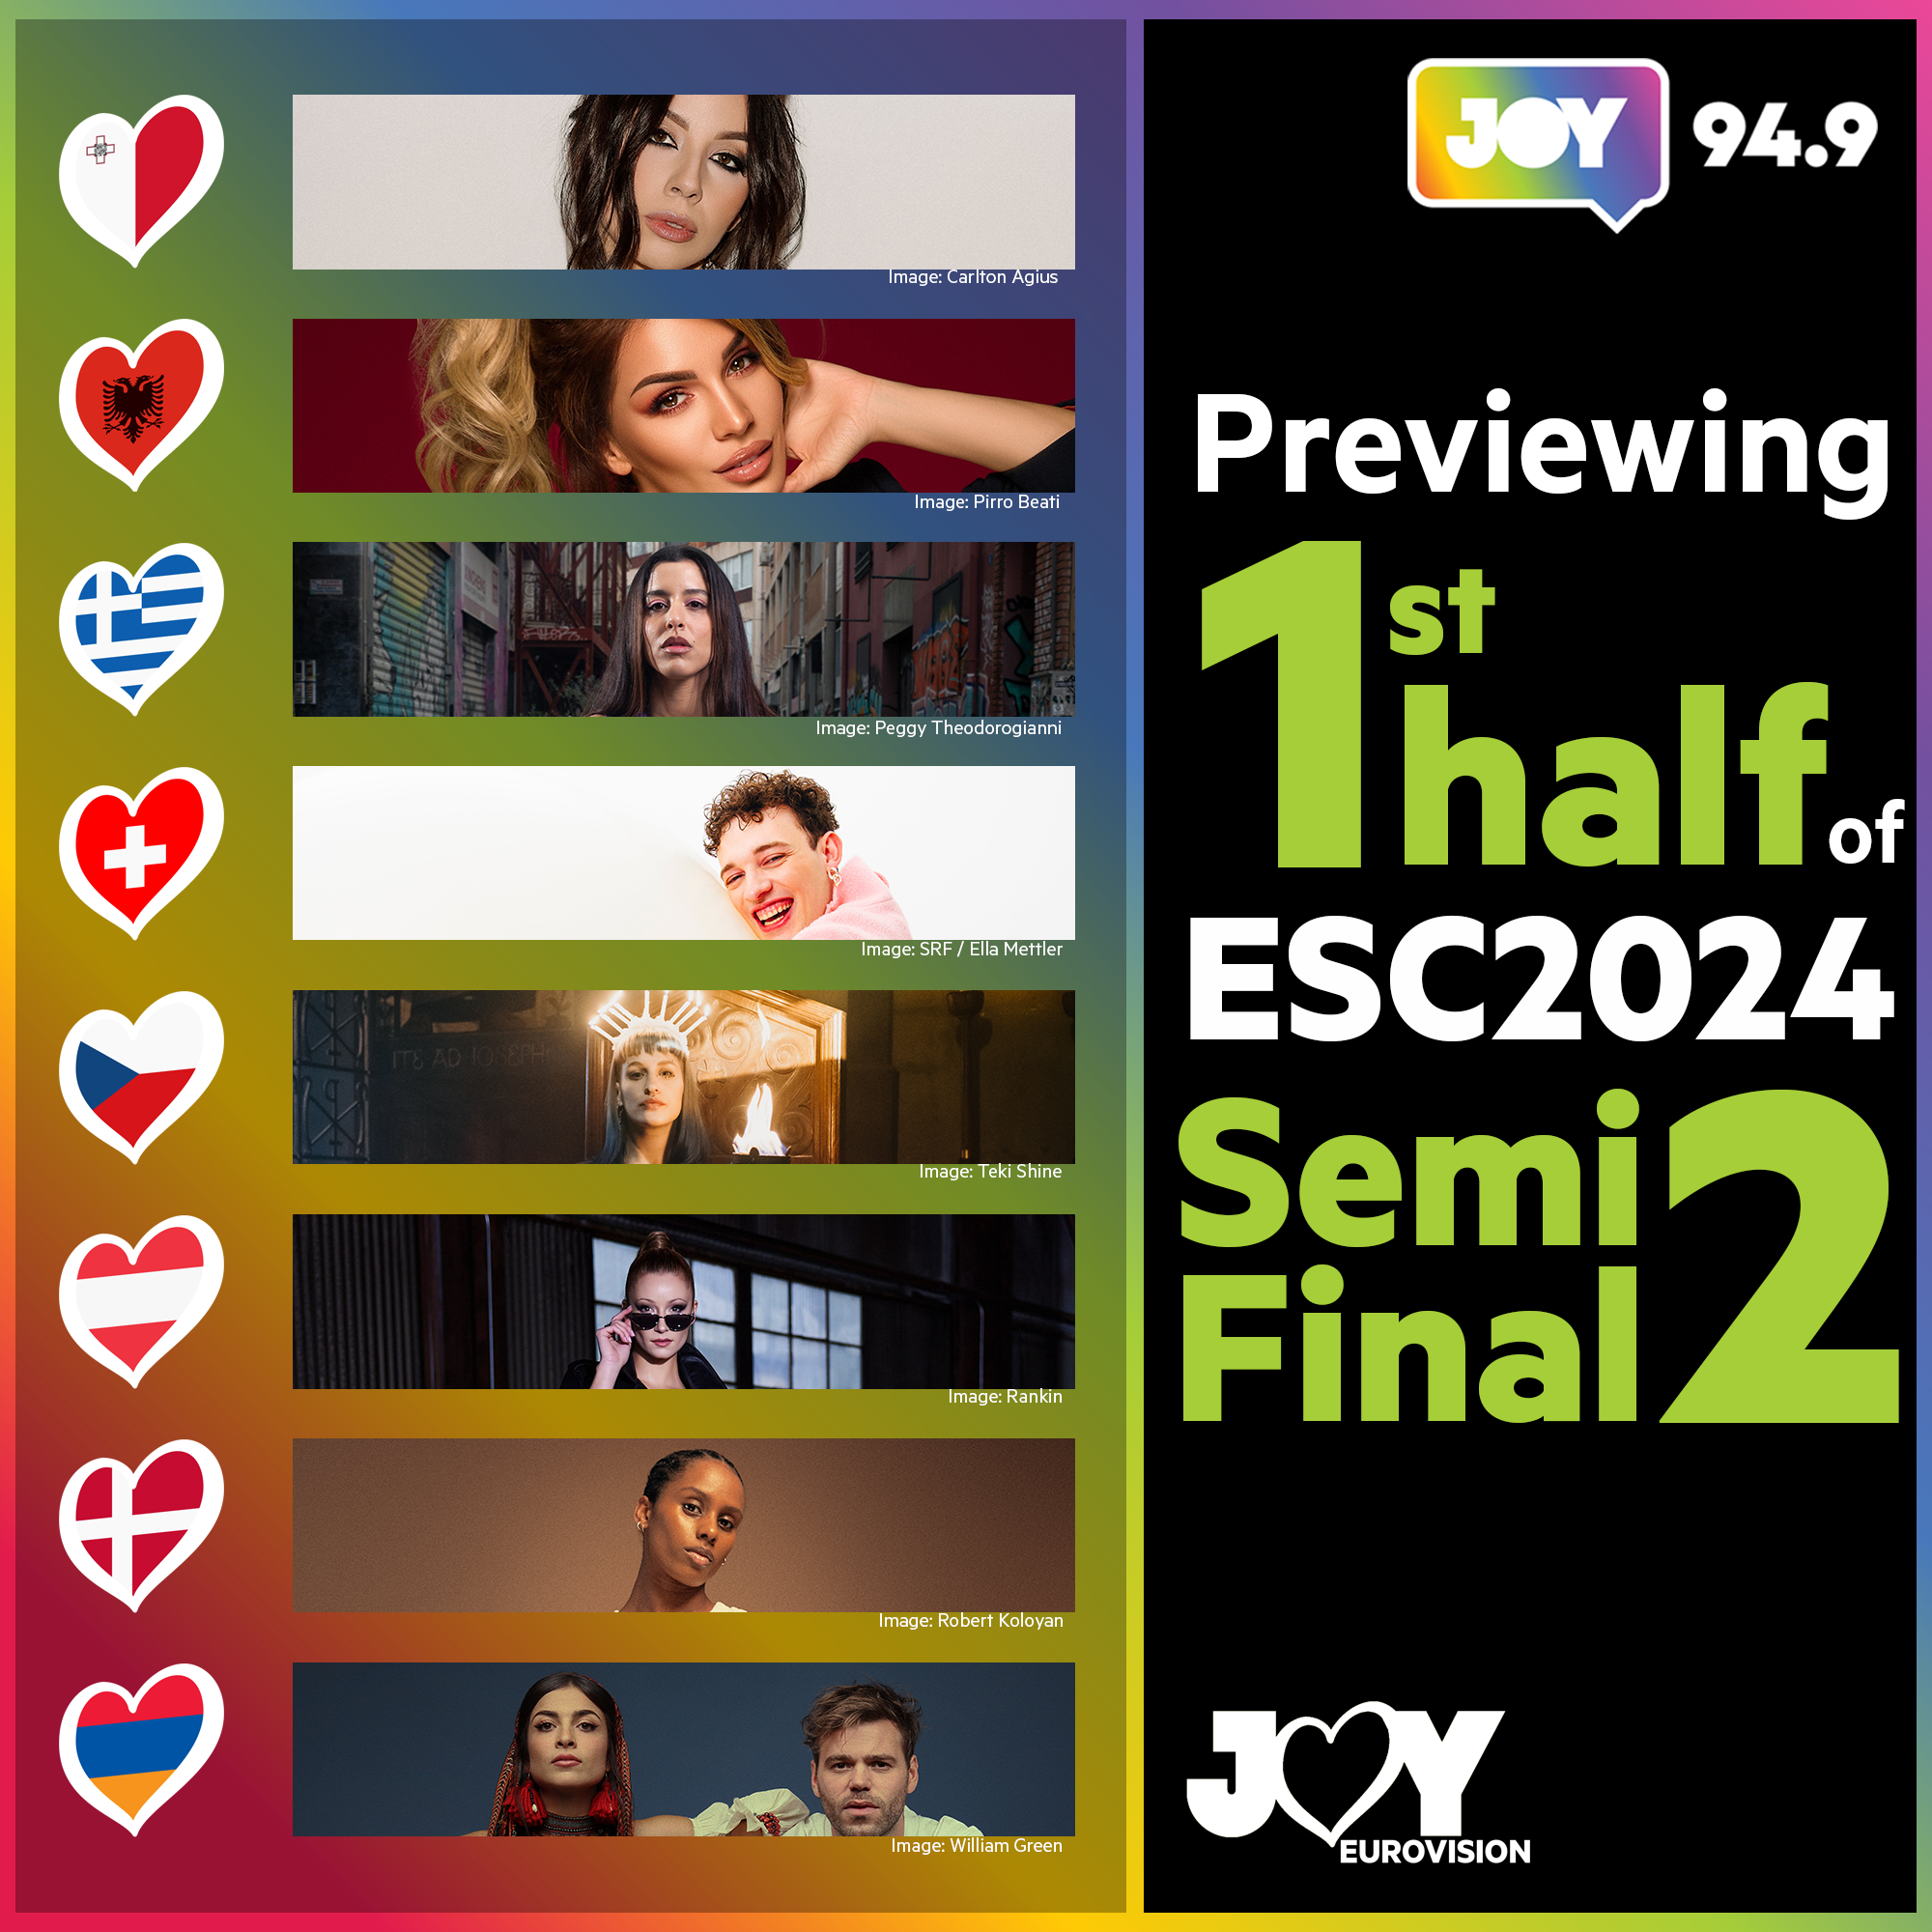 Previewing the first half of Eurovision 2024 Semi Final 2